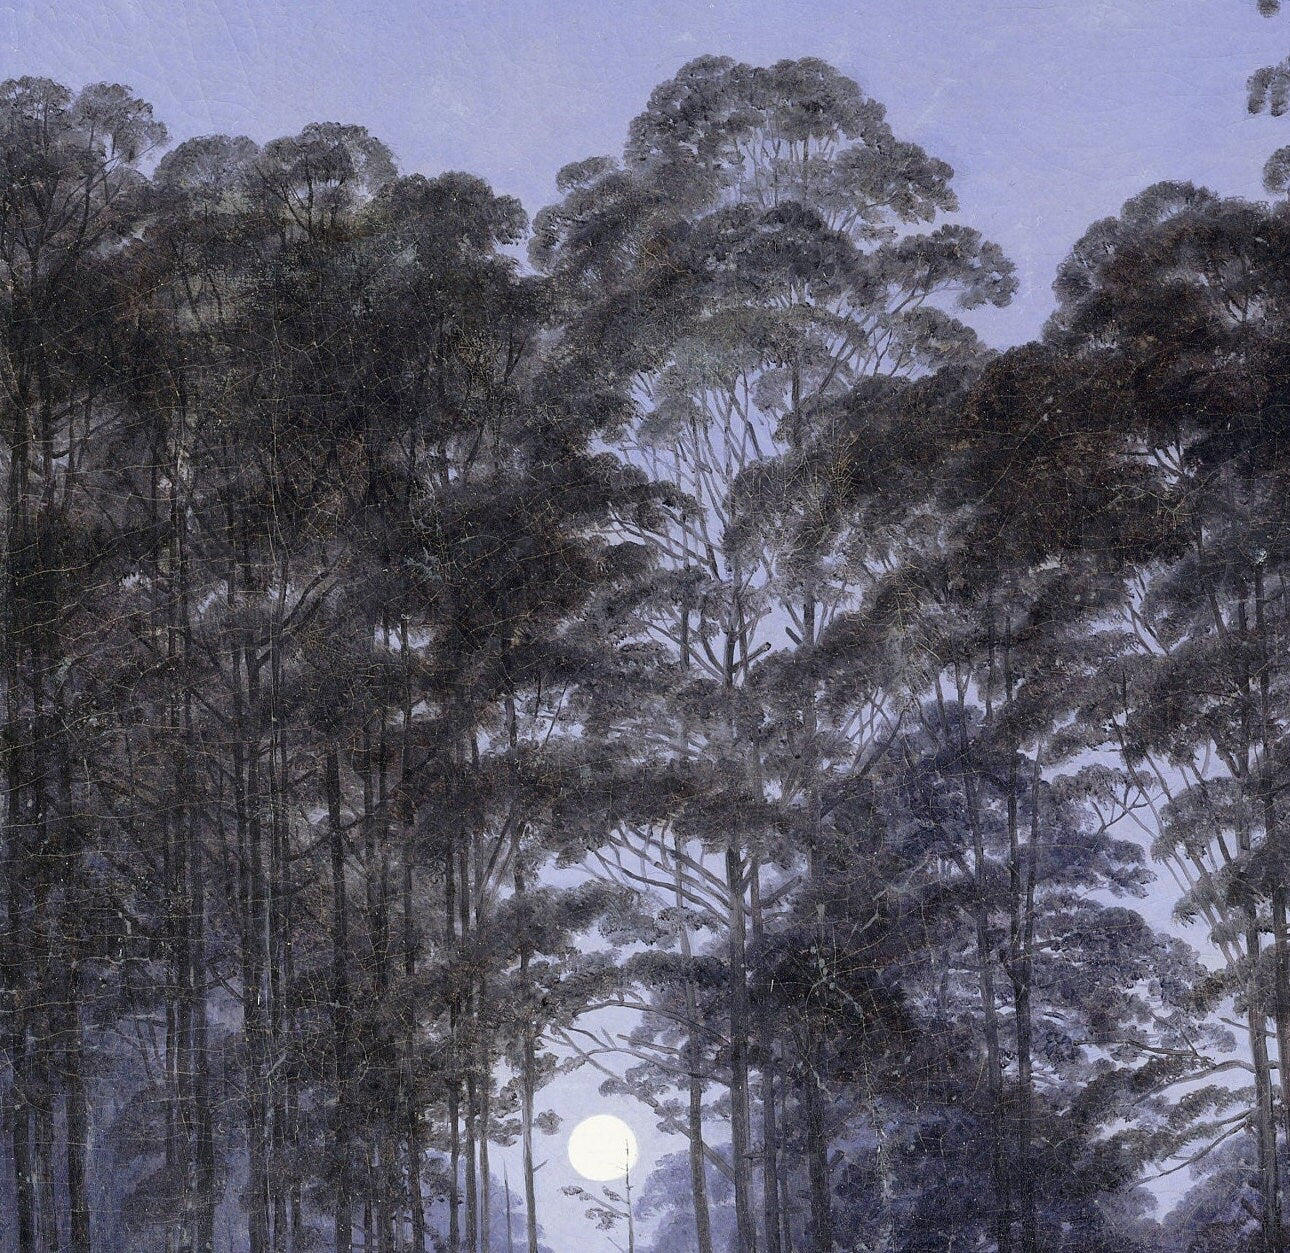 Inside the forest in the moonlight by Caspar Friedrich,3d Printed with texture and brush strokes looks like original oil-painting, code:826